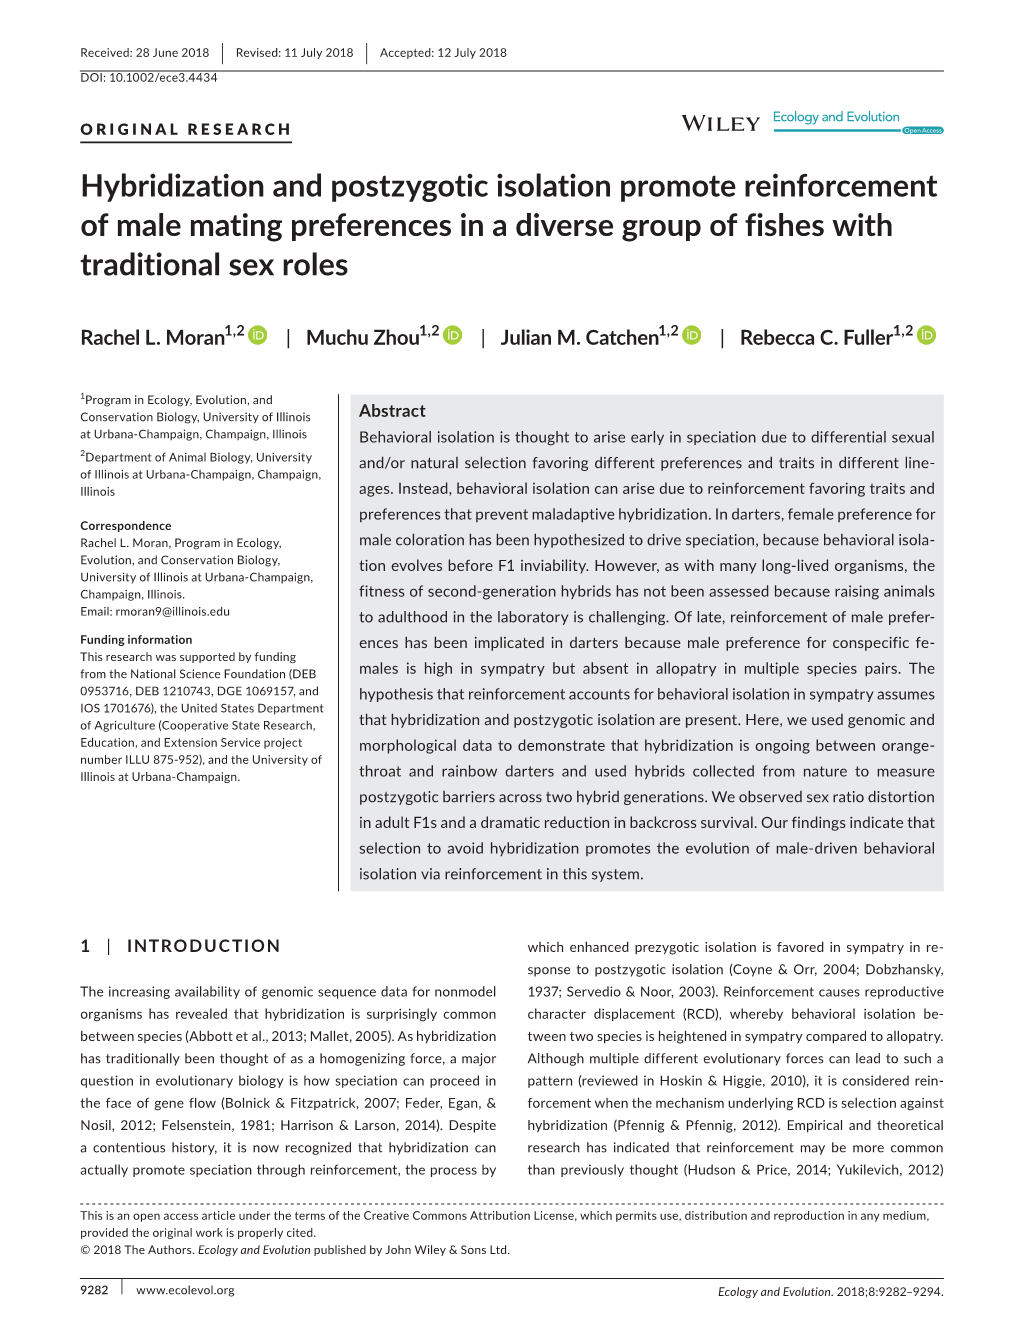 Hybridization and Postzygotic Isolation Promote Reinforcement of Male Mating Preferences in a Diverse Group of Fishes with Traditional Sex Roles